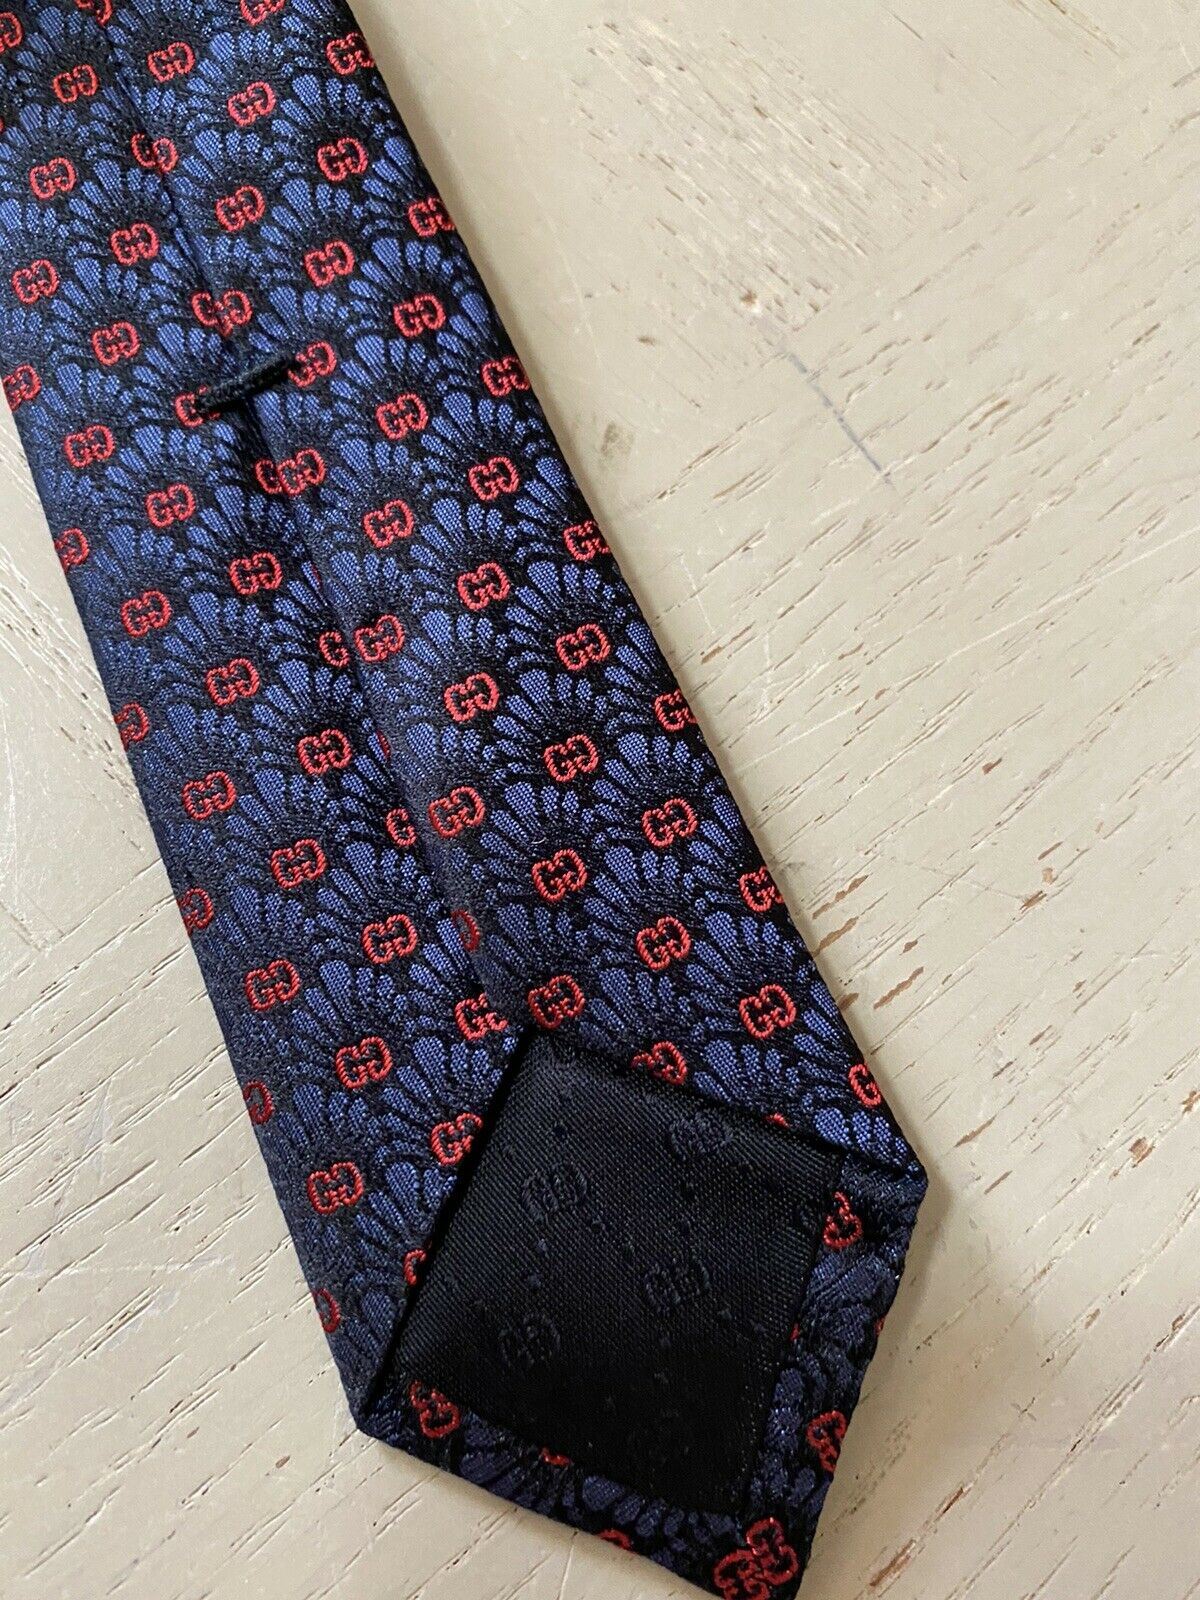 New  Gucci Mens GG Monogram Neck Tie Blue/Red made in Italy